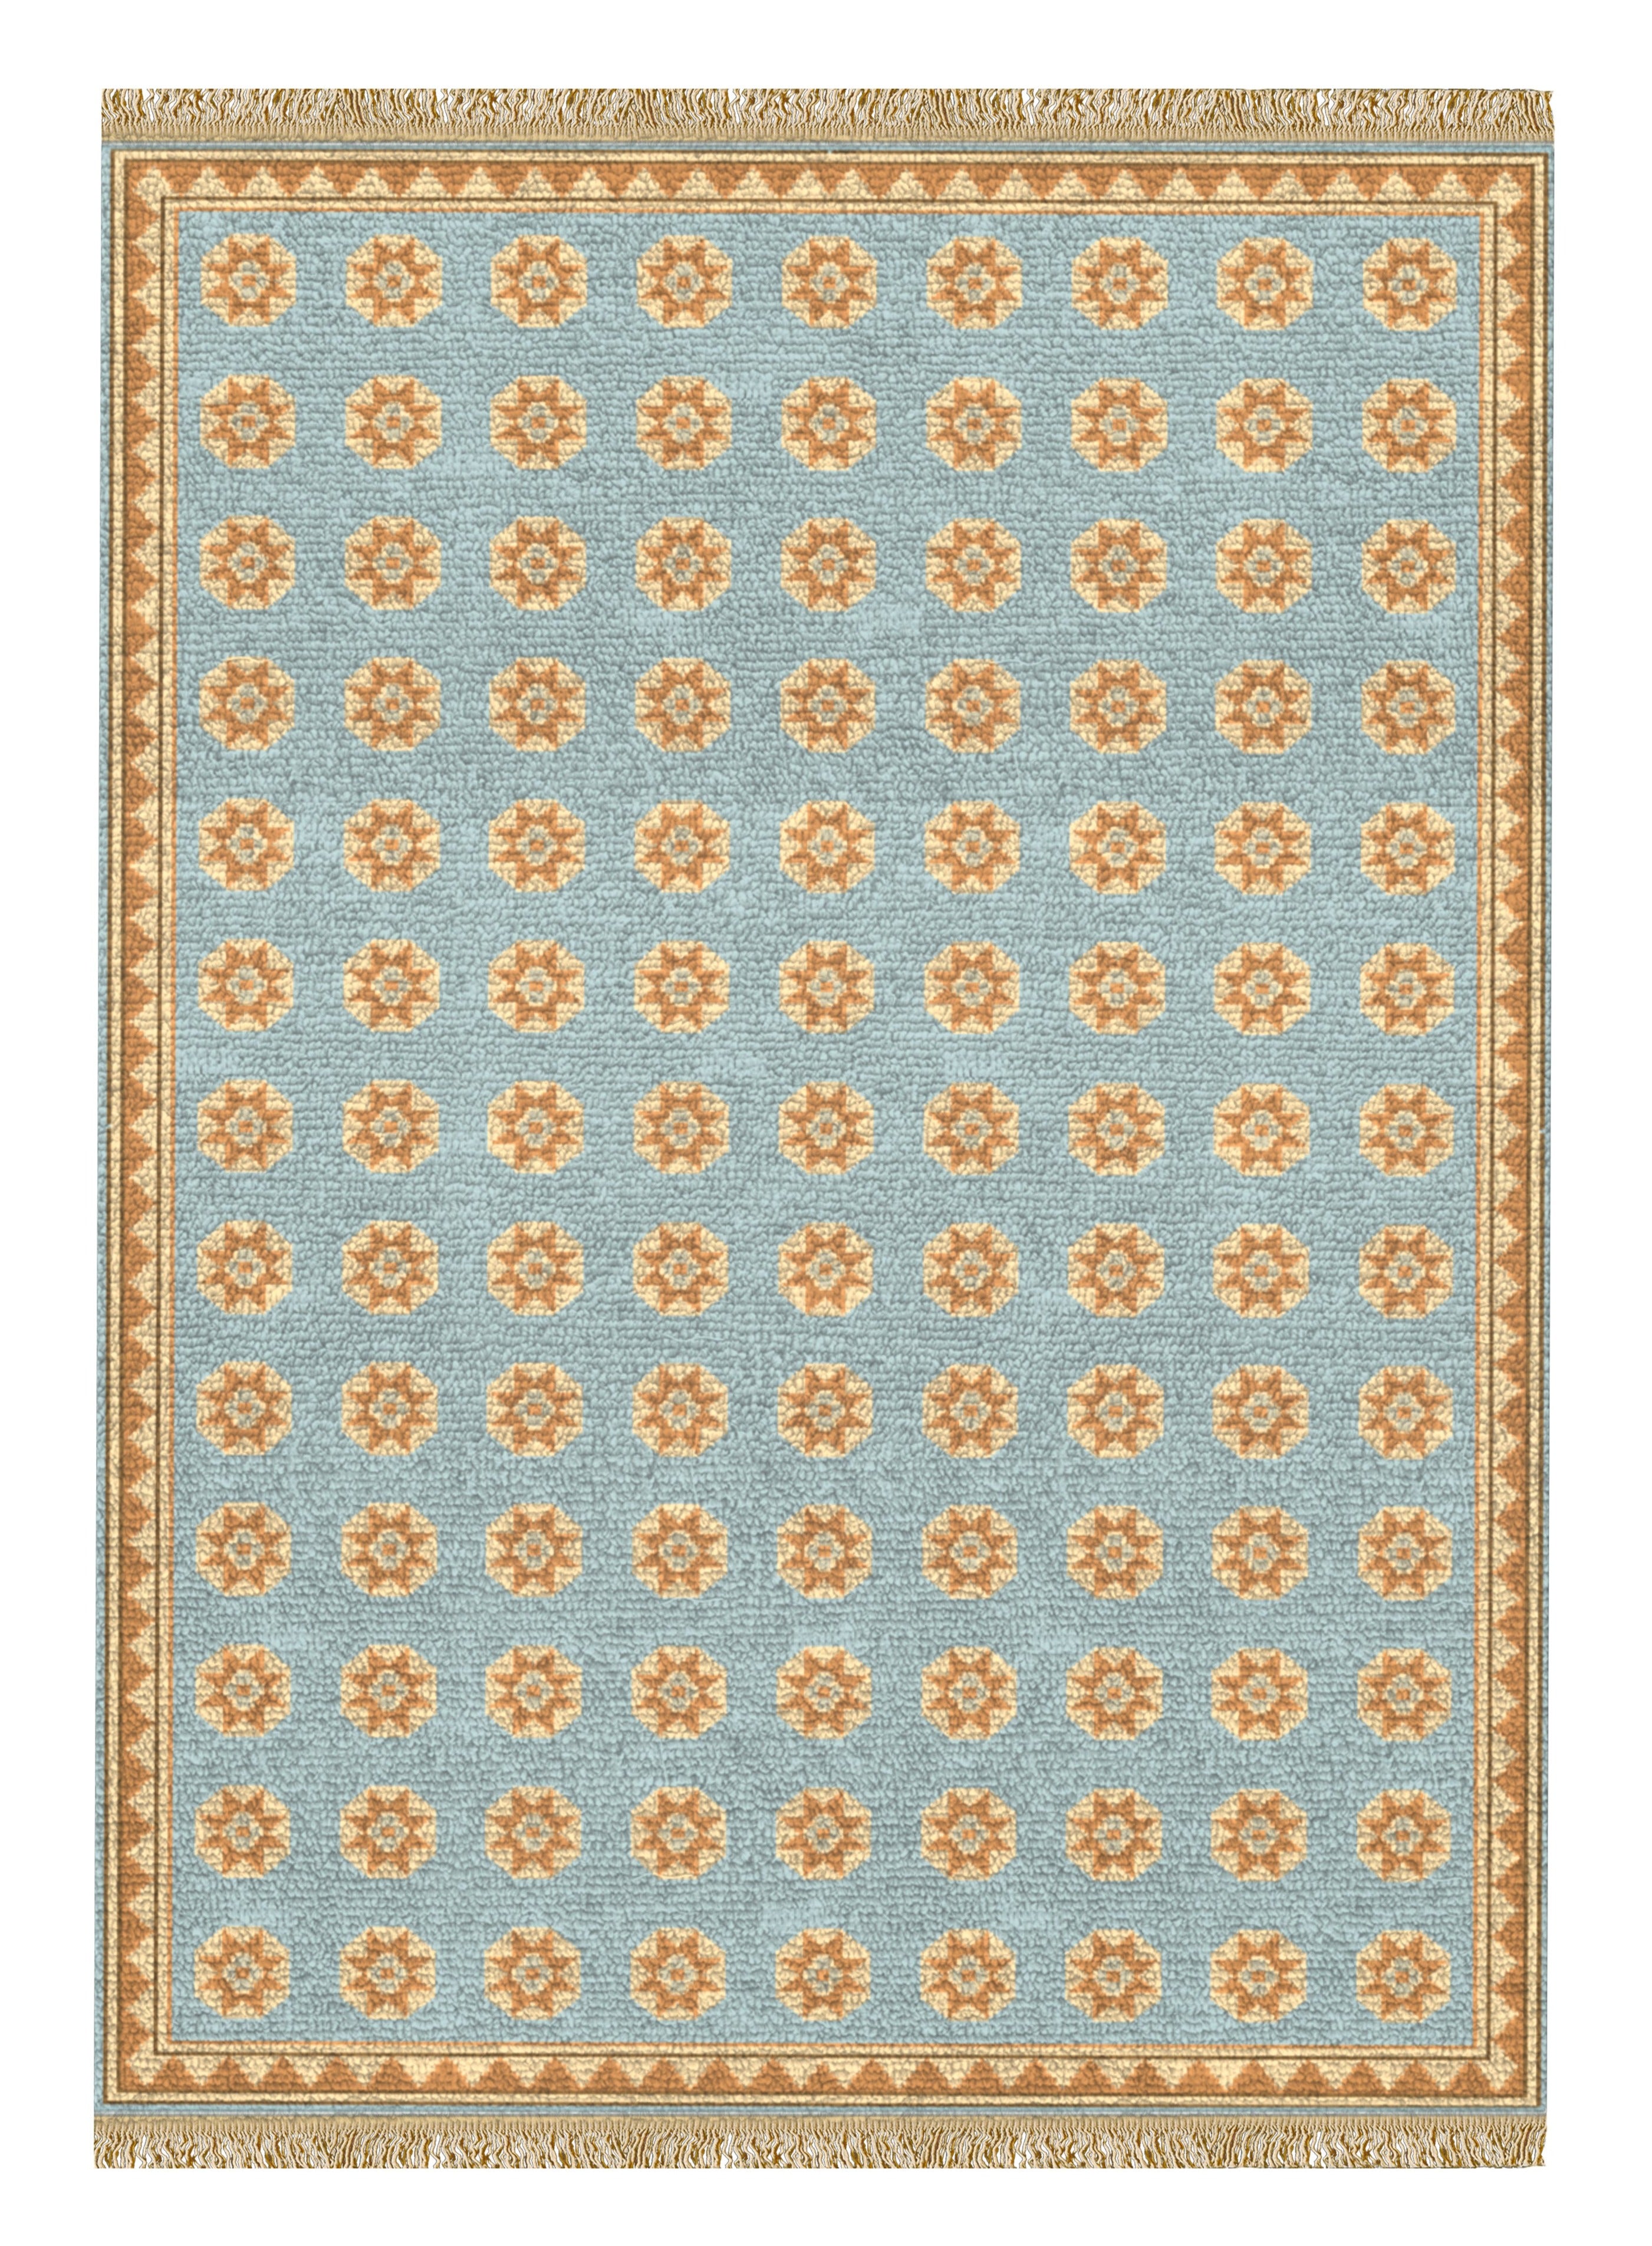 Mamluk Hand-Knotted Wool Area Rug by Kevin Francis Design | Atlanta Interior Designer | Luxury Home Decor